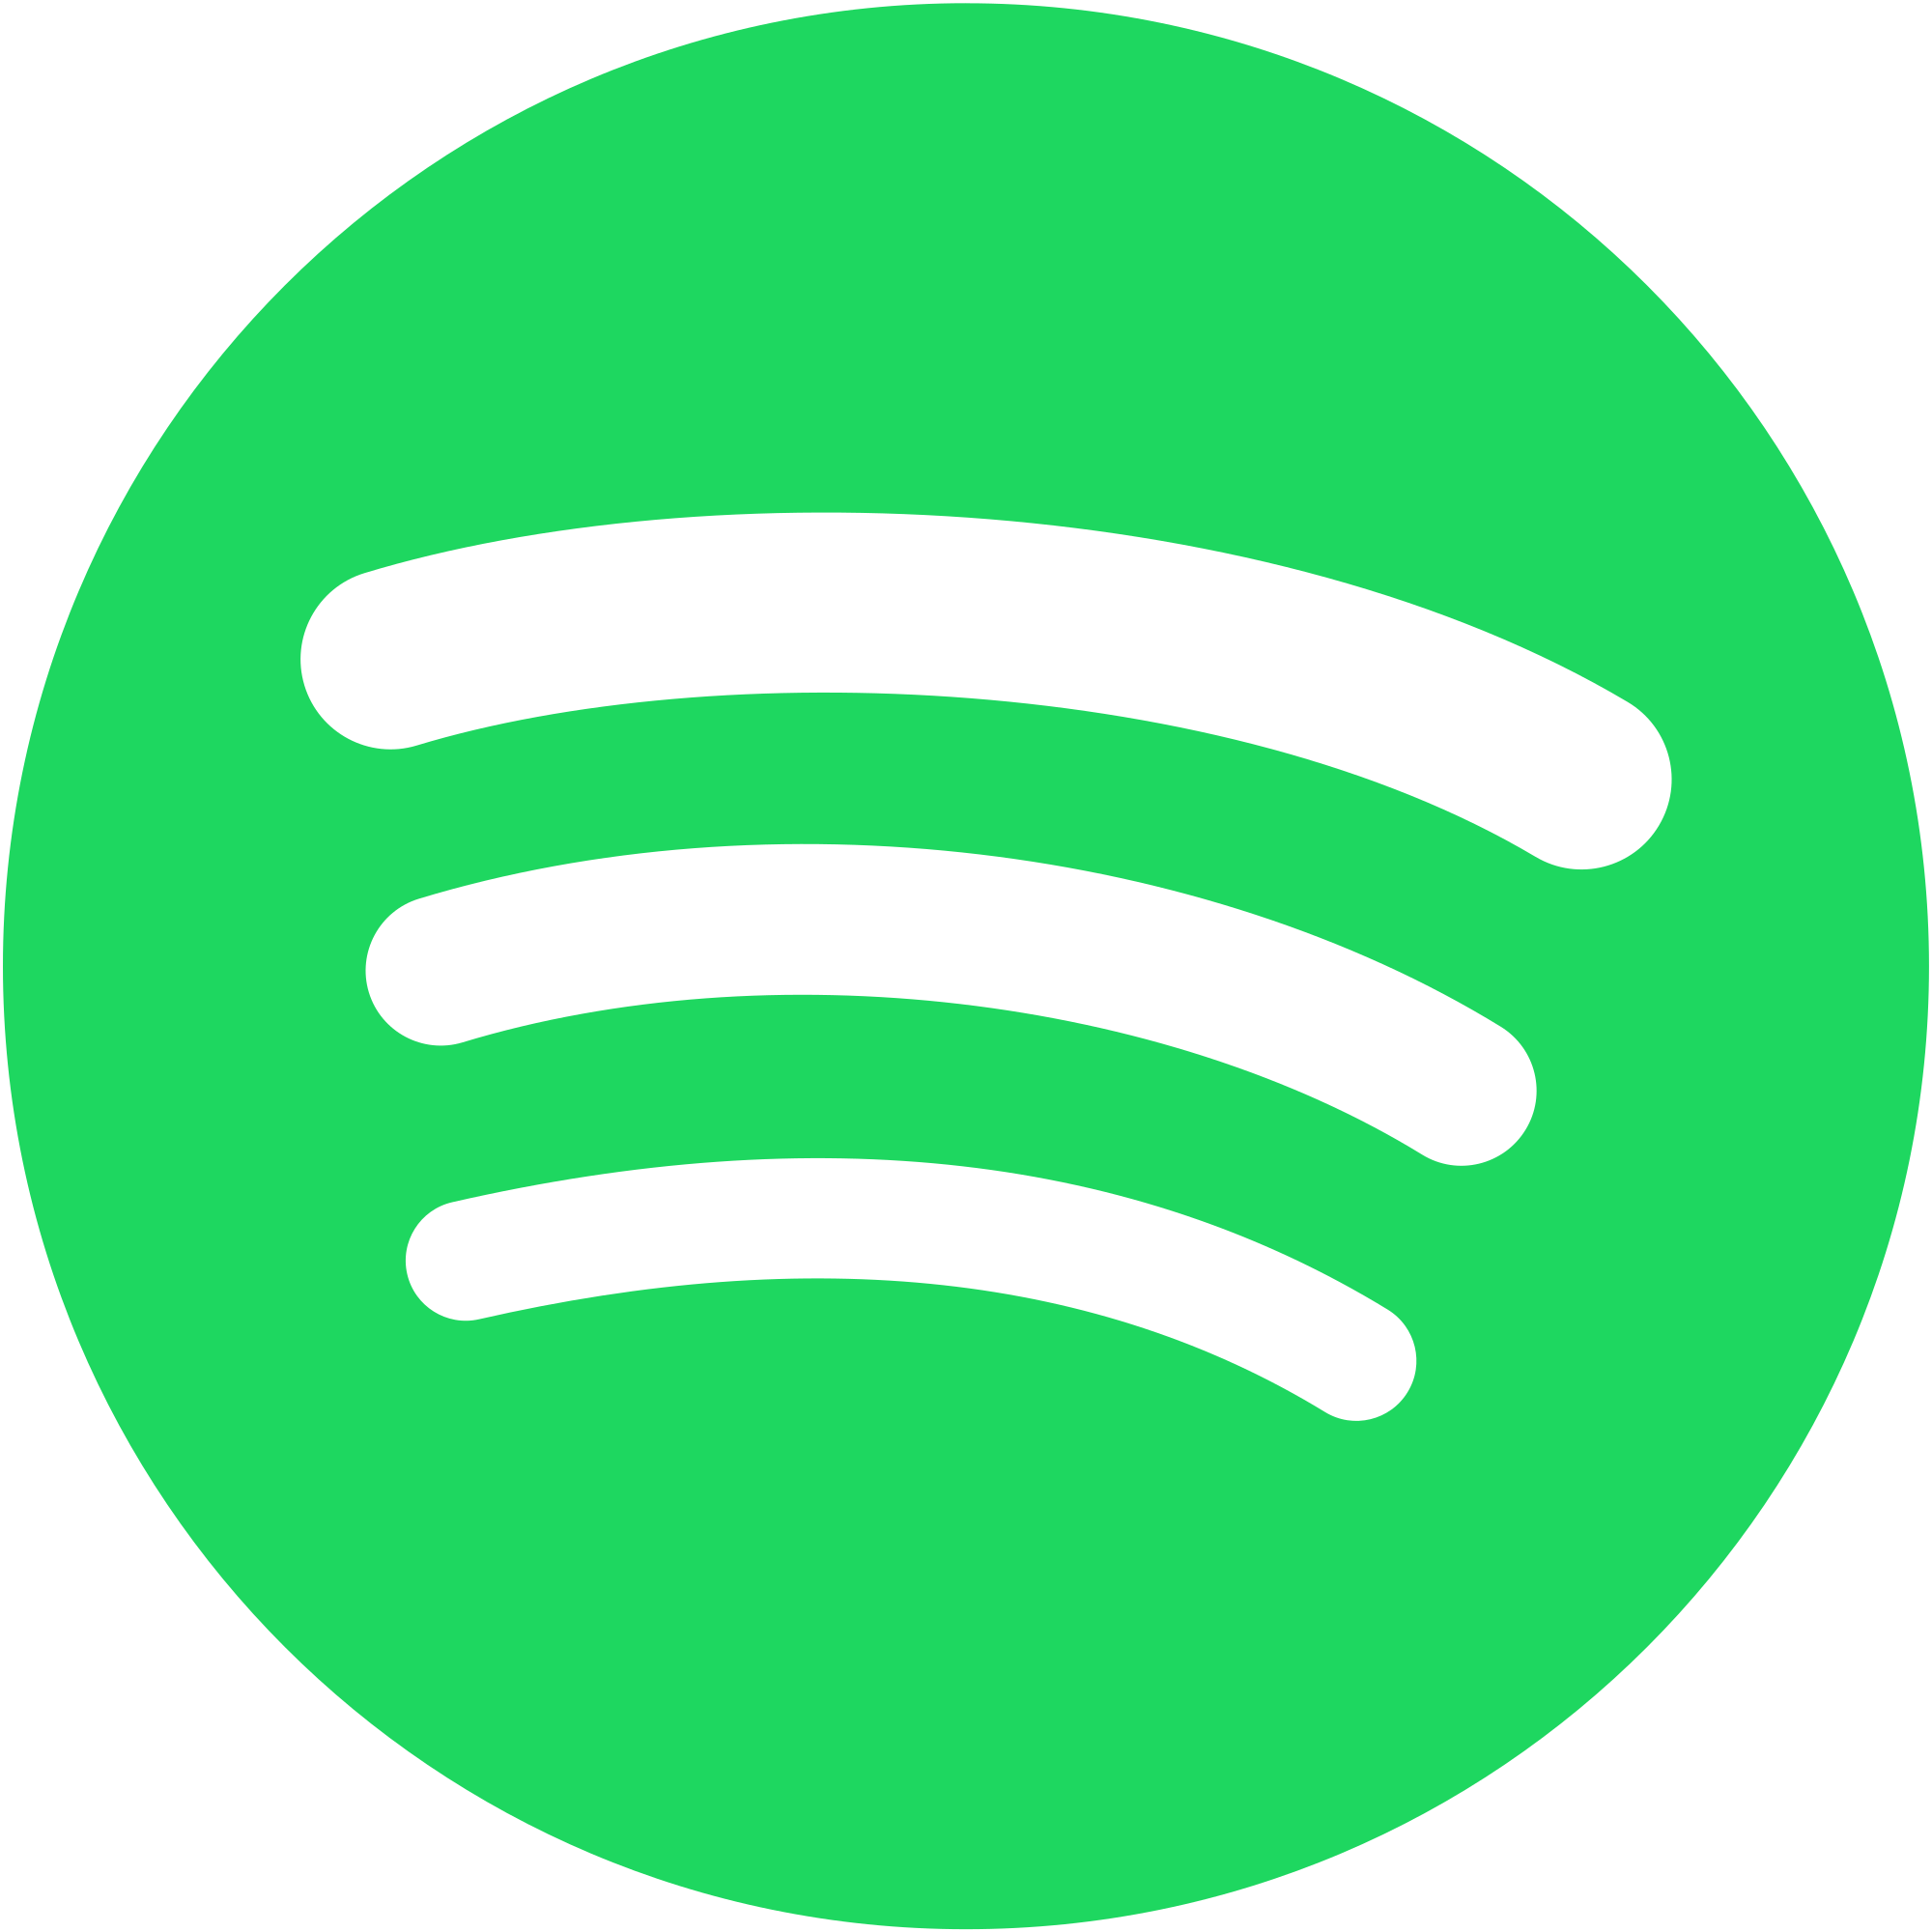 spotify-logo-png-open-2000.png